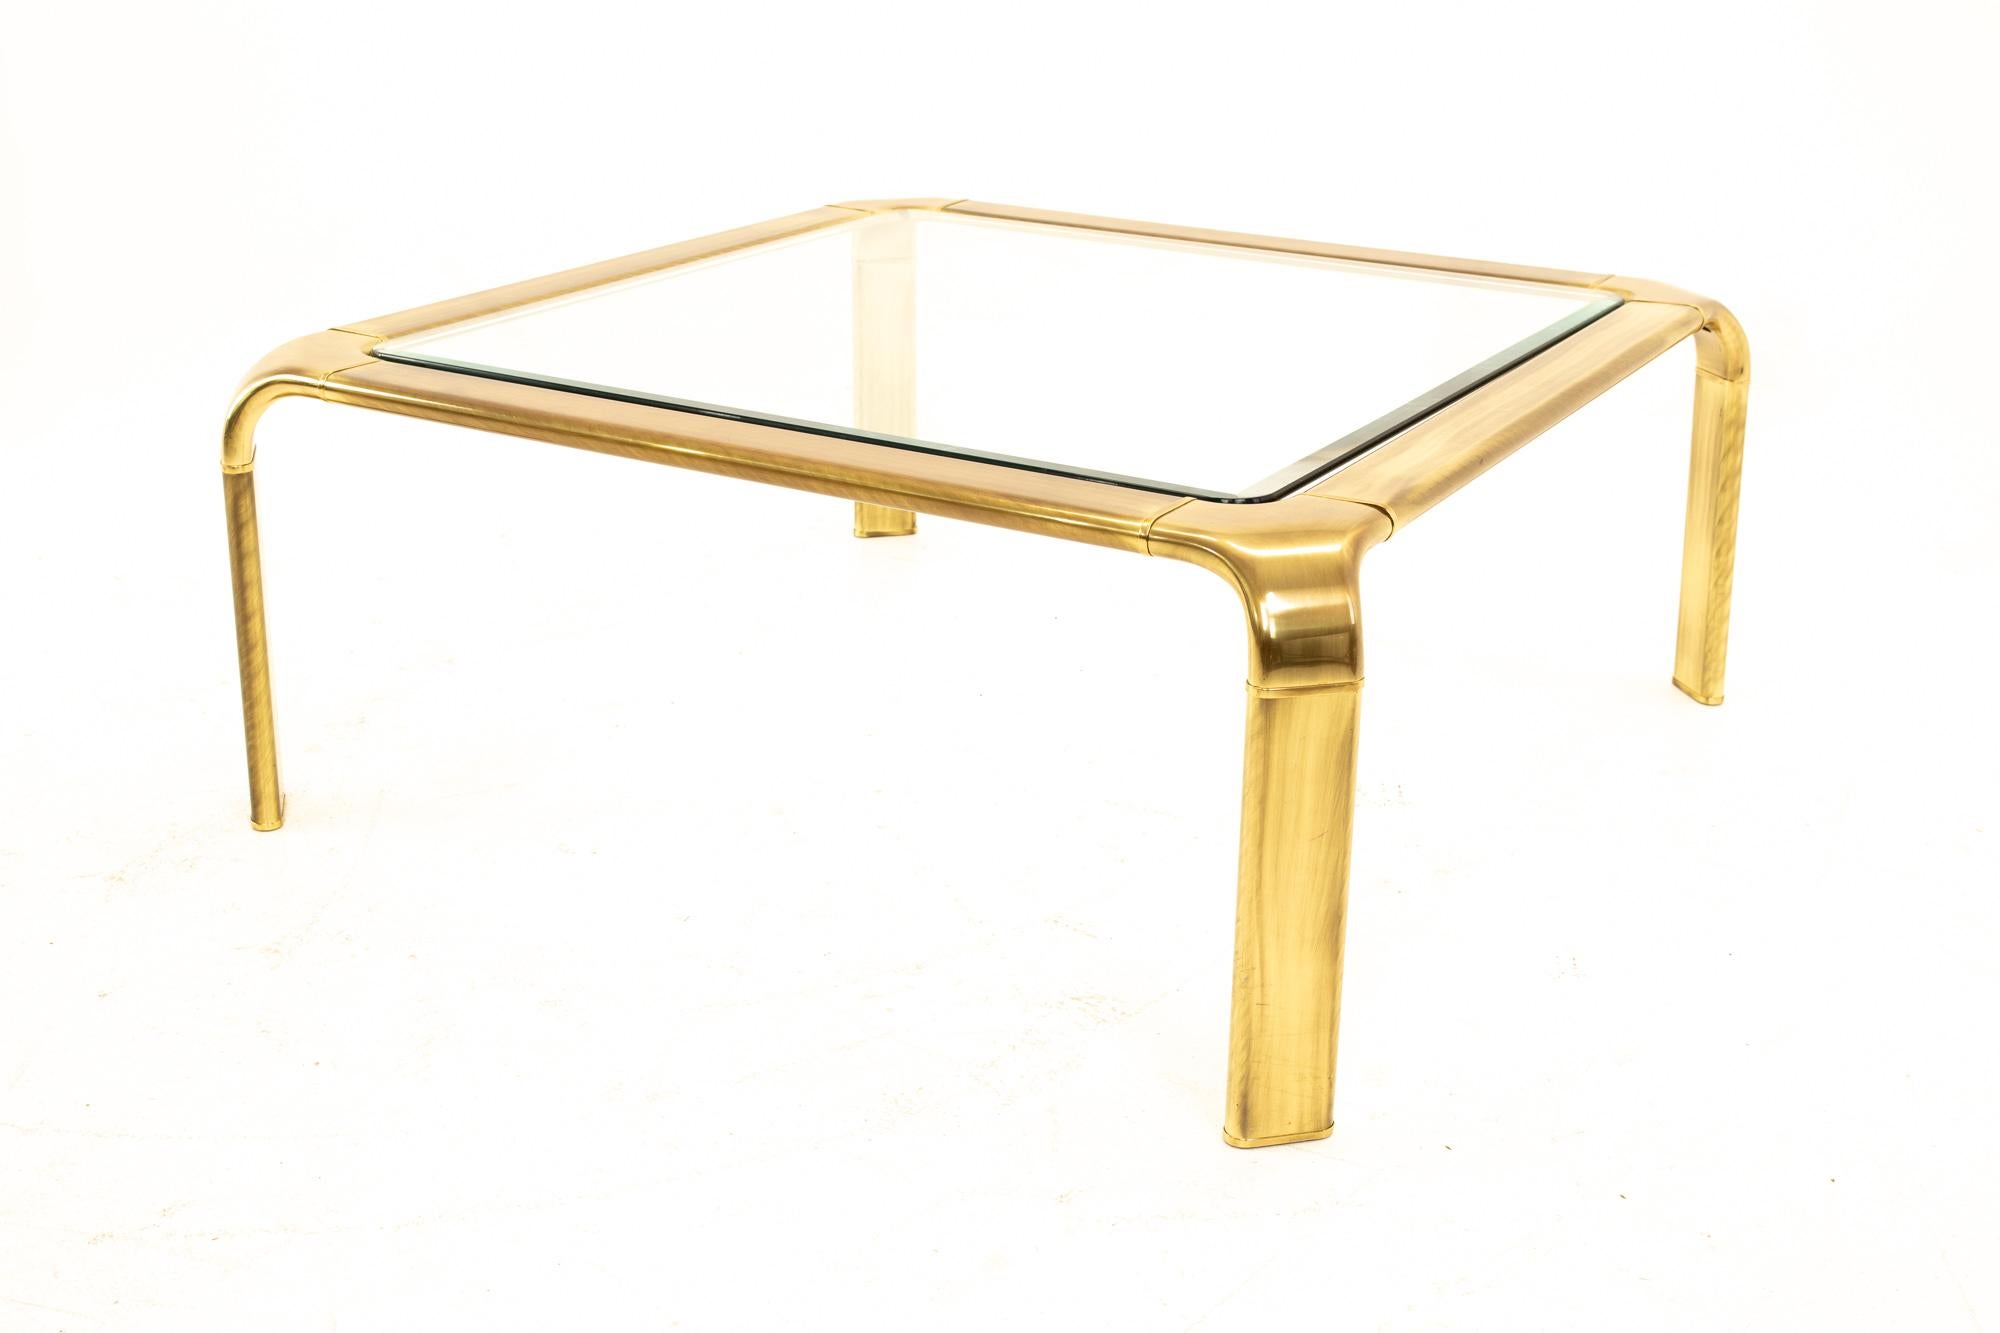 Mastercraft brass mid century coffee table
Table measures: 38 wide x 38 deep x 16 high

All pieces of furniture can be had in what we call restored vintage condition. That means the piece is restored upon purchase so it’s free of watermarks,